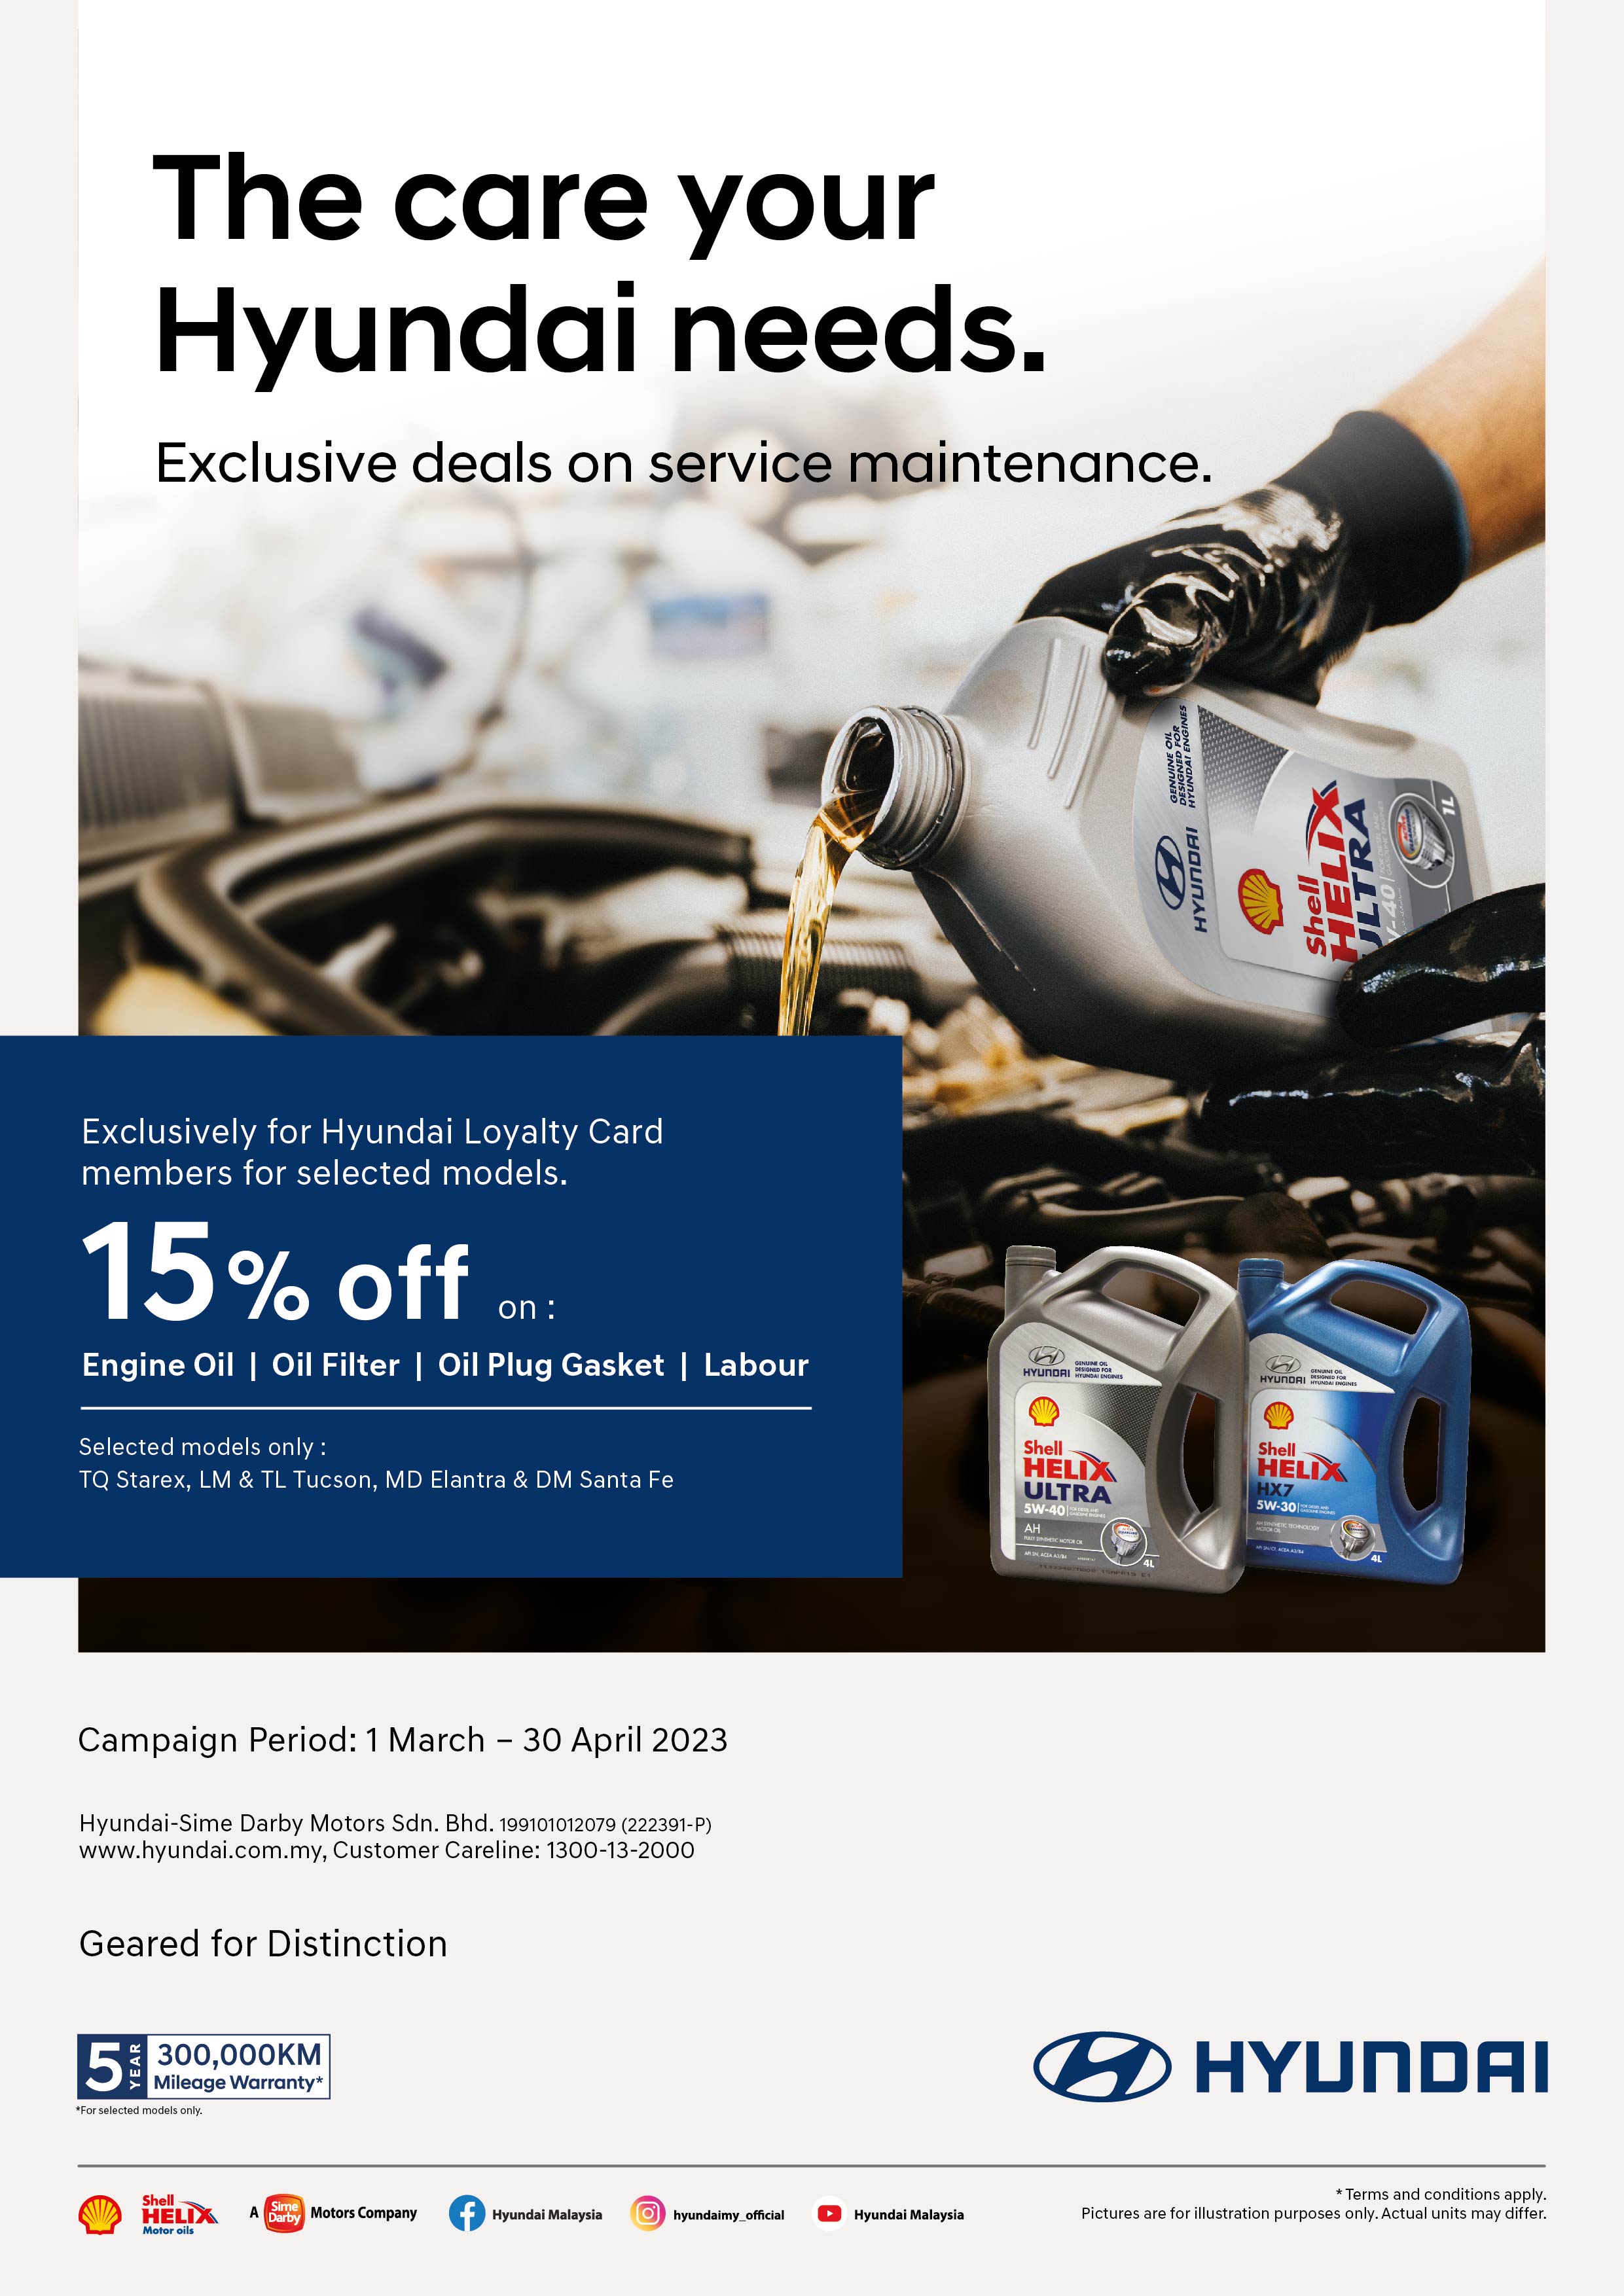 The care your Hyundai needs. Exclusive deals on service maintenance. | Exclusively for Hyundai Loyalty Card members for selected models. | 15% off on engine oil, oil filter, oil plug gasket and labour. Selected models only : TQ Starex, LM & TL Tucson, MD Elantra & DM Santa Fe | Hyundai Malaysia Promotion.